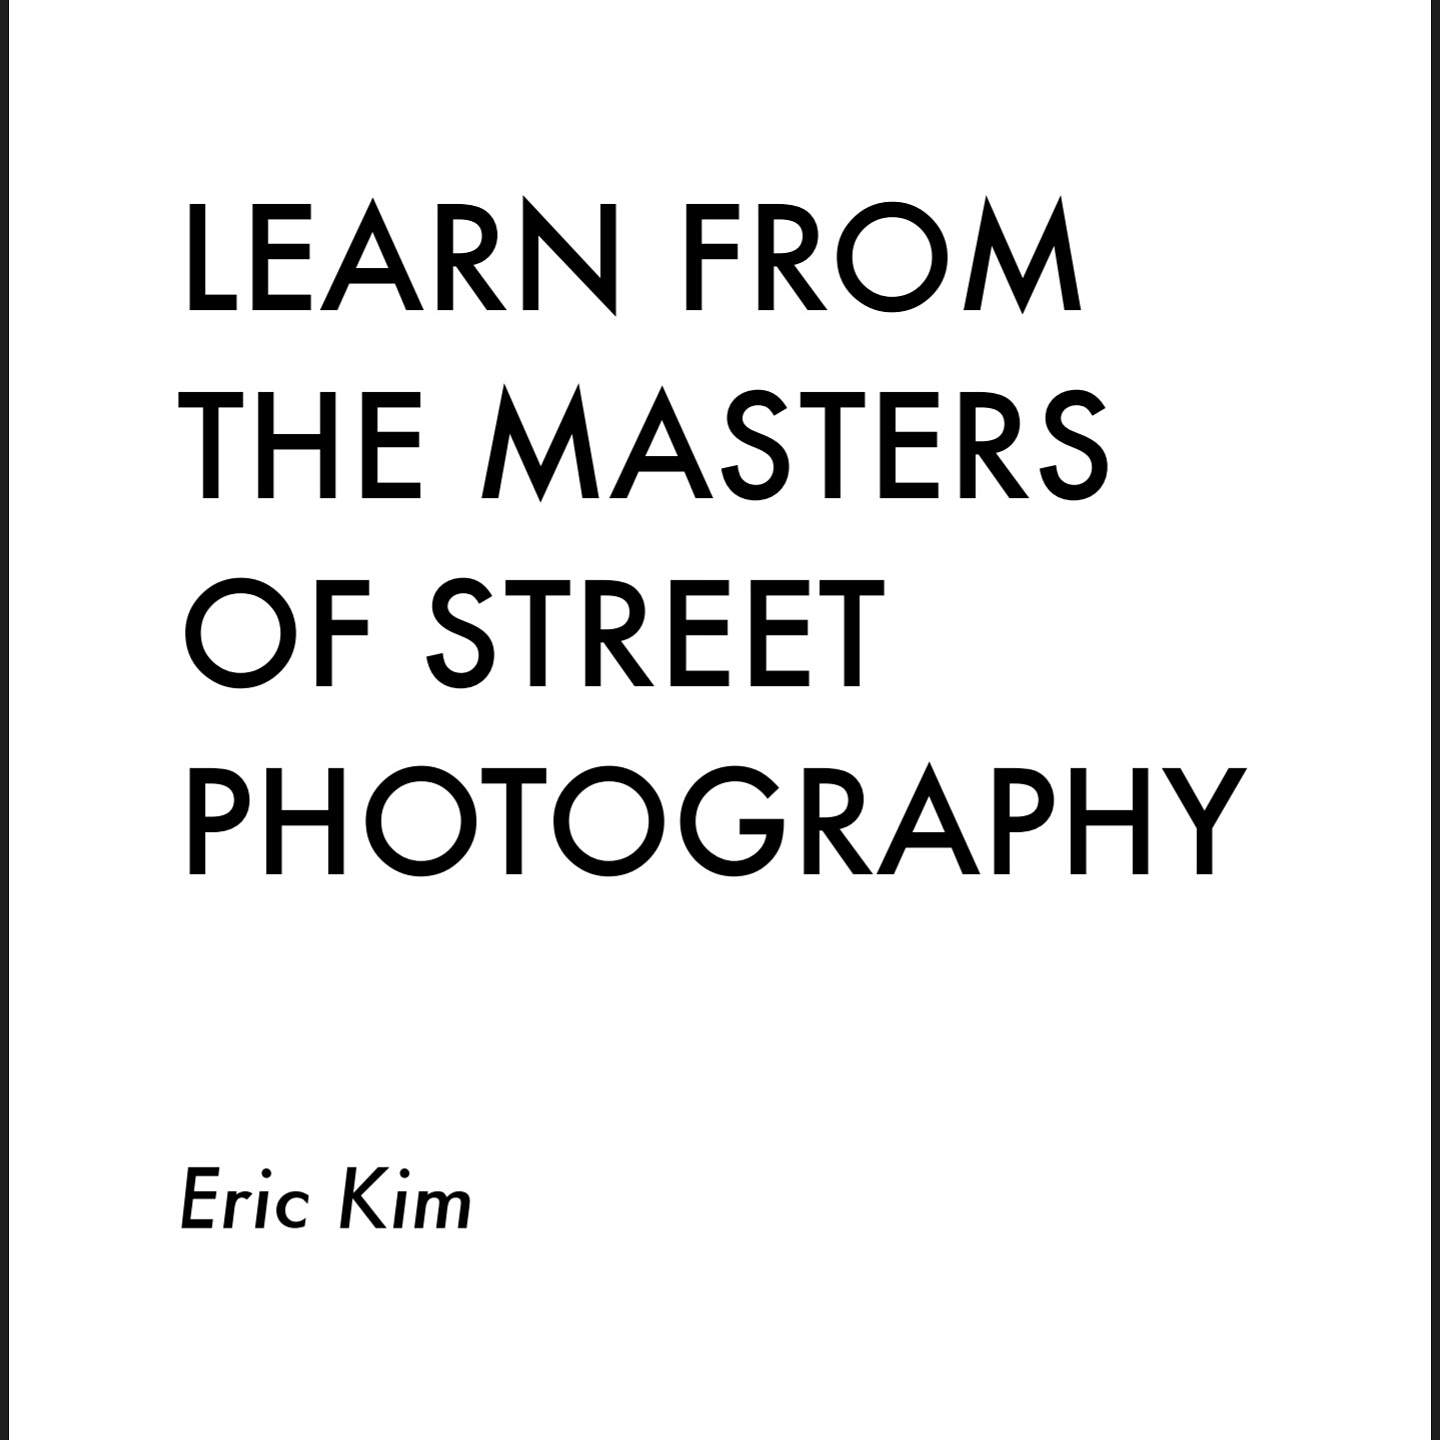 Free Sample Chapters: “Learn From the Masters of Street Photography”